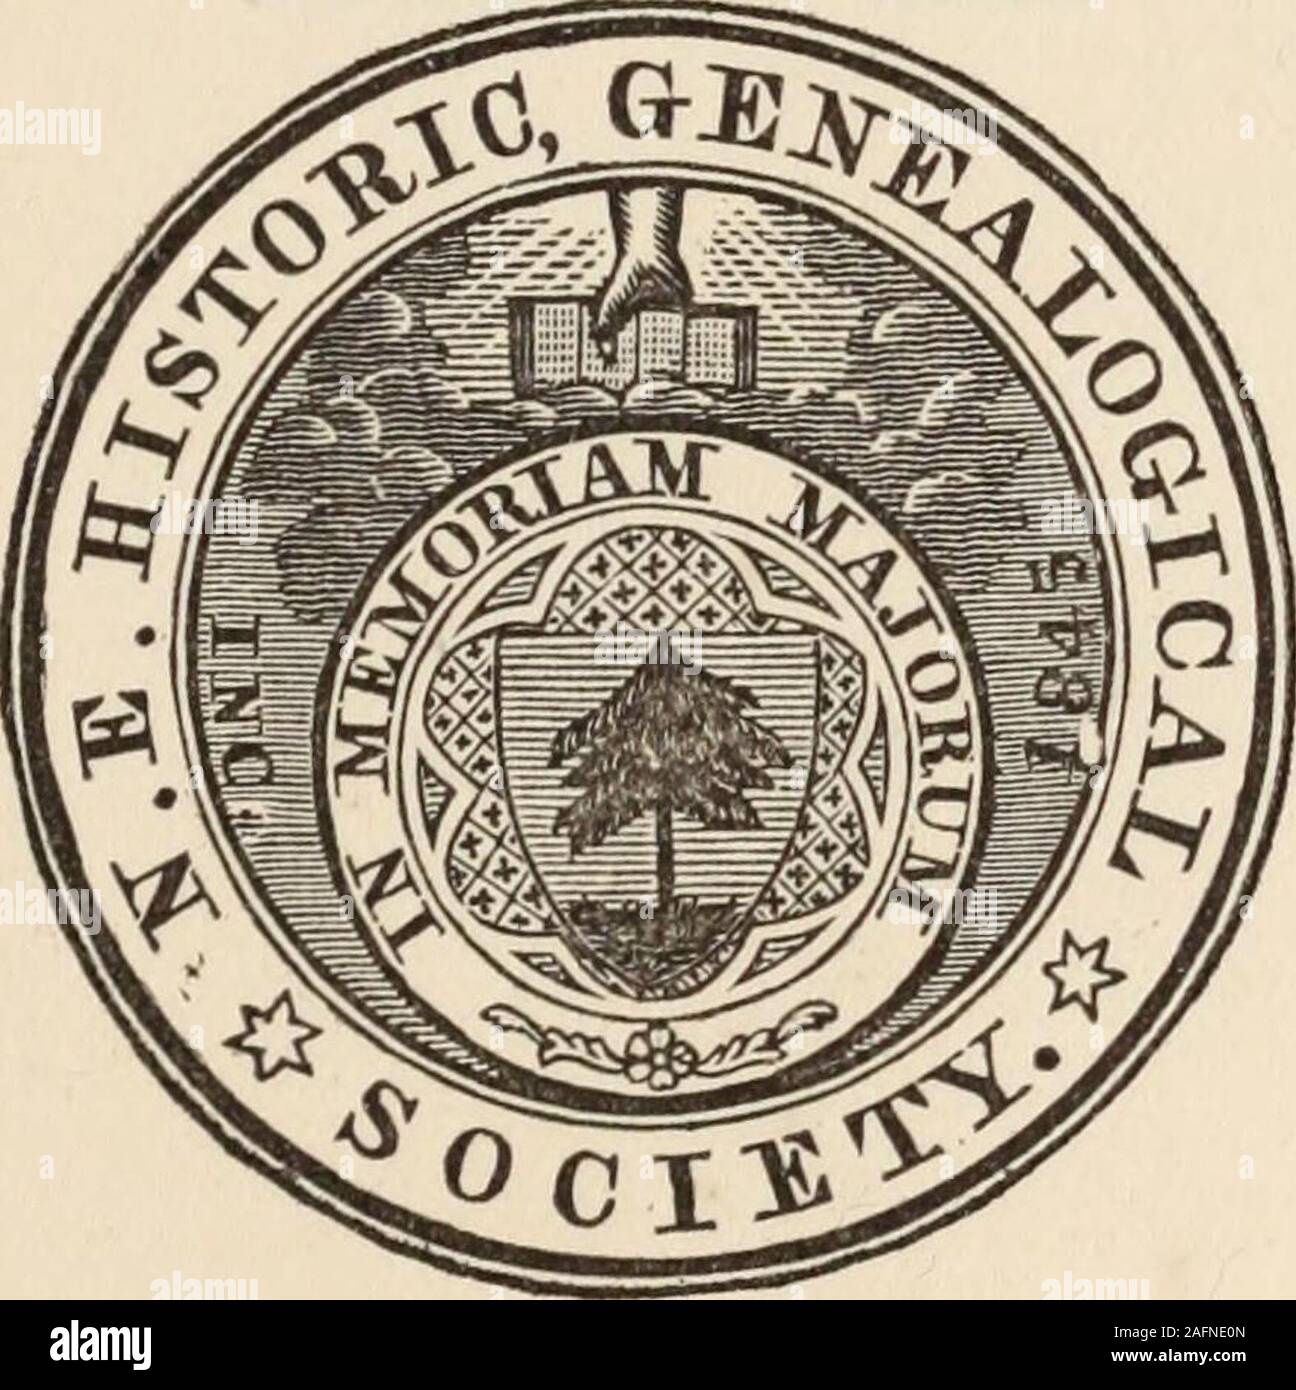 . The New England historical and genealogical register. BOSTON: PUBLISHED AT THE SOCIETYS HOUSE, 18 SOMERSET STREET. Printed by David Clapp & Son. 1888. Commits m filiation, 1888. JOHN WARD DEAN, WILLIAM B. TRASK, LUCIUS R. PAIGE, HENRY H. EDES, EDMUND F. SLAFTER, HENRY E. WAITE, JEREMIAH COLBURN, FRANCIS E. BLAKE. (JBUttar,JOHN WARD DEAN. bt/-380 U o 4 Lnewenglandhistor42wate Stock Photo